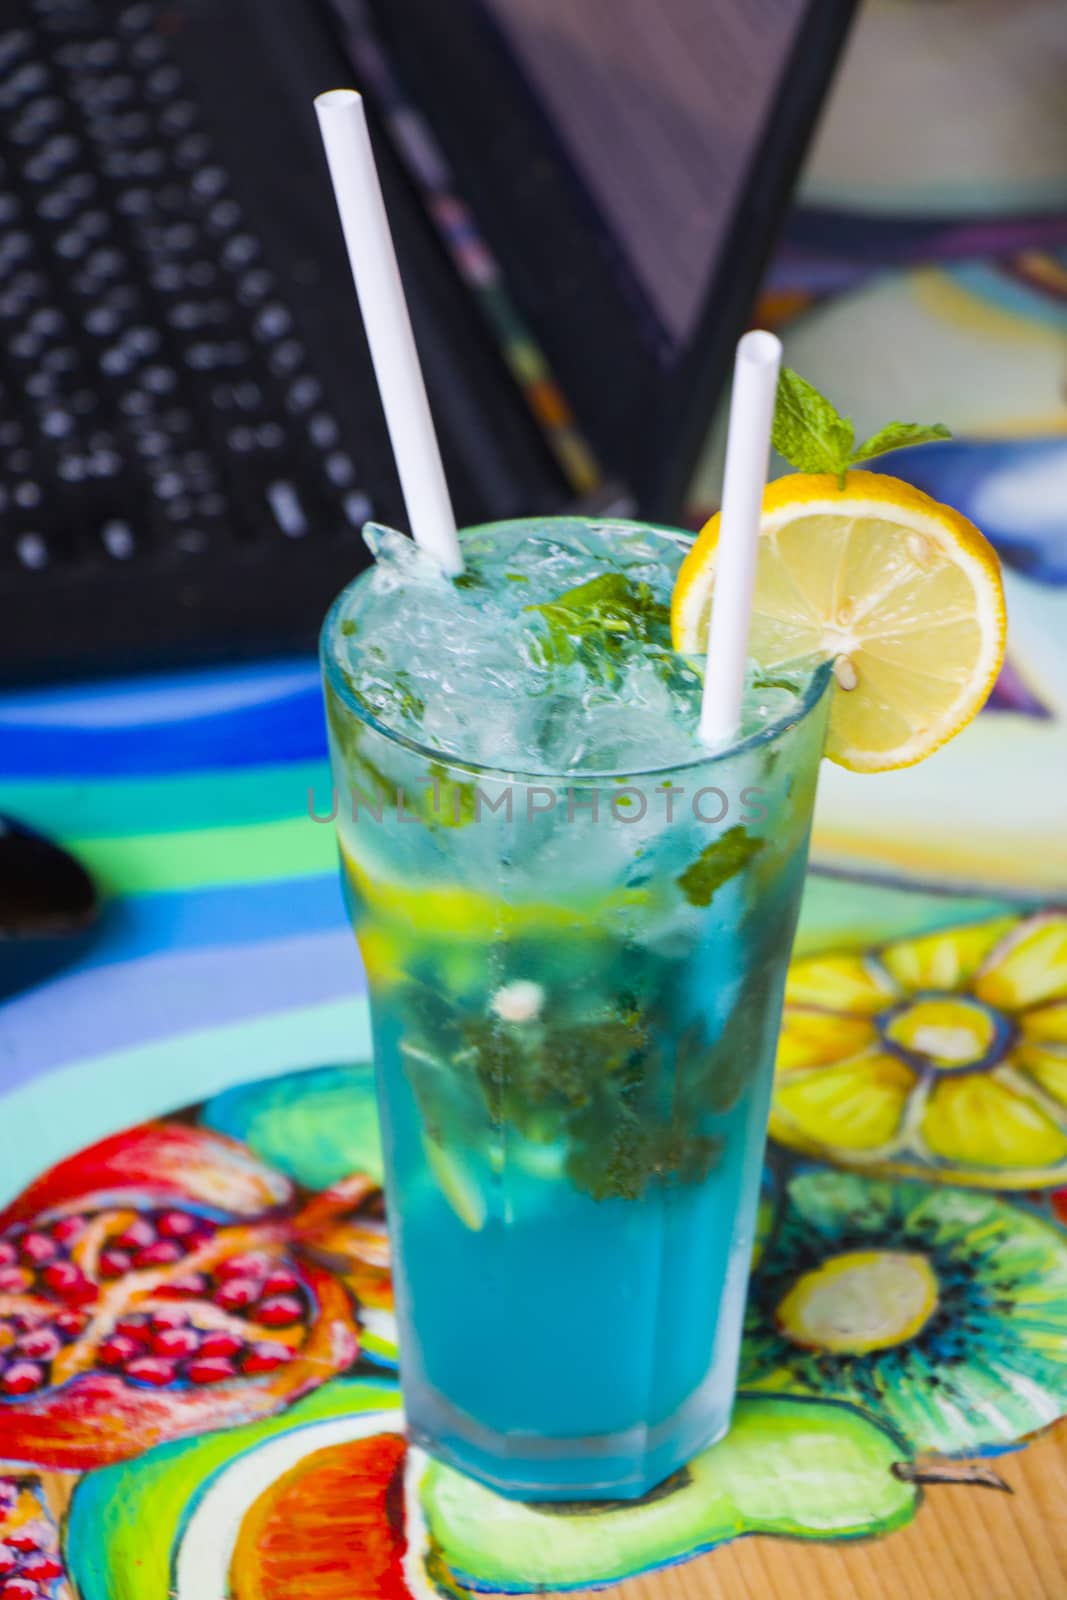 Blue cocktail with curacao and citruses. Alcoholic drink. Summer holidays. Cocktail full glass with ice cubes.